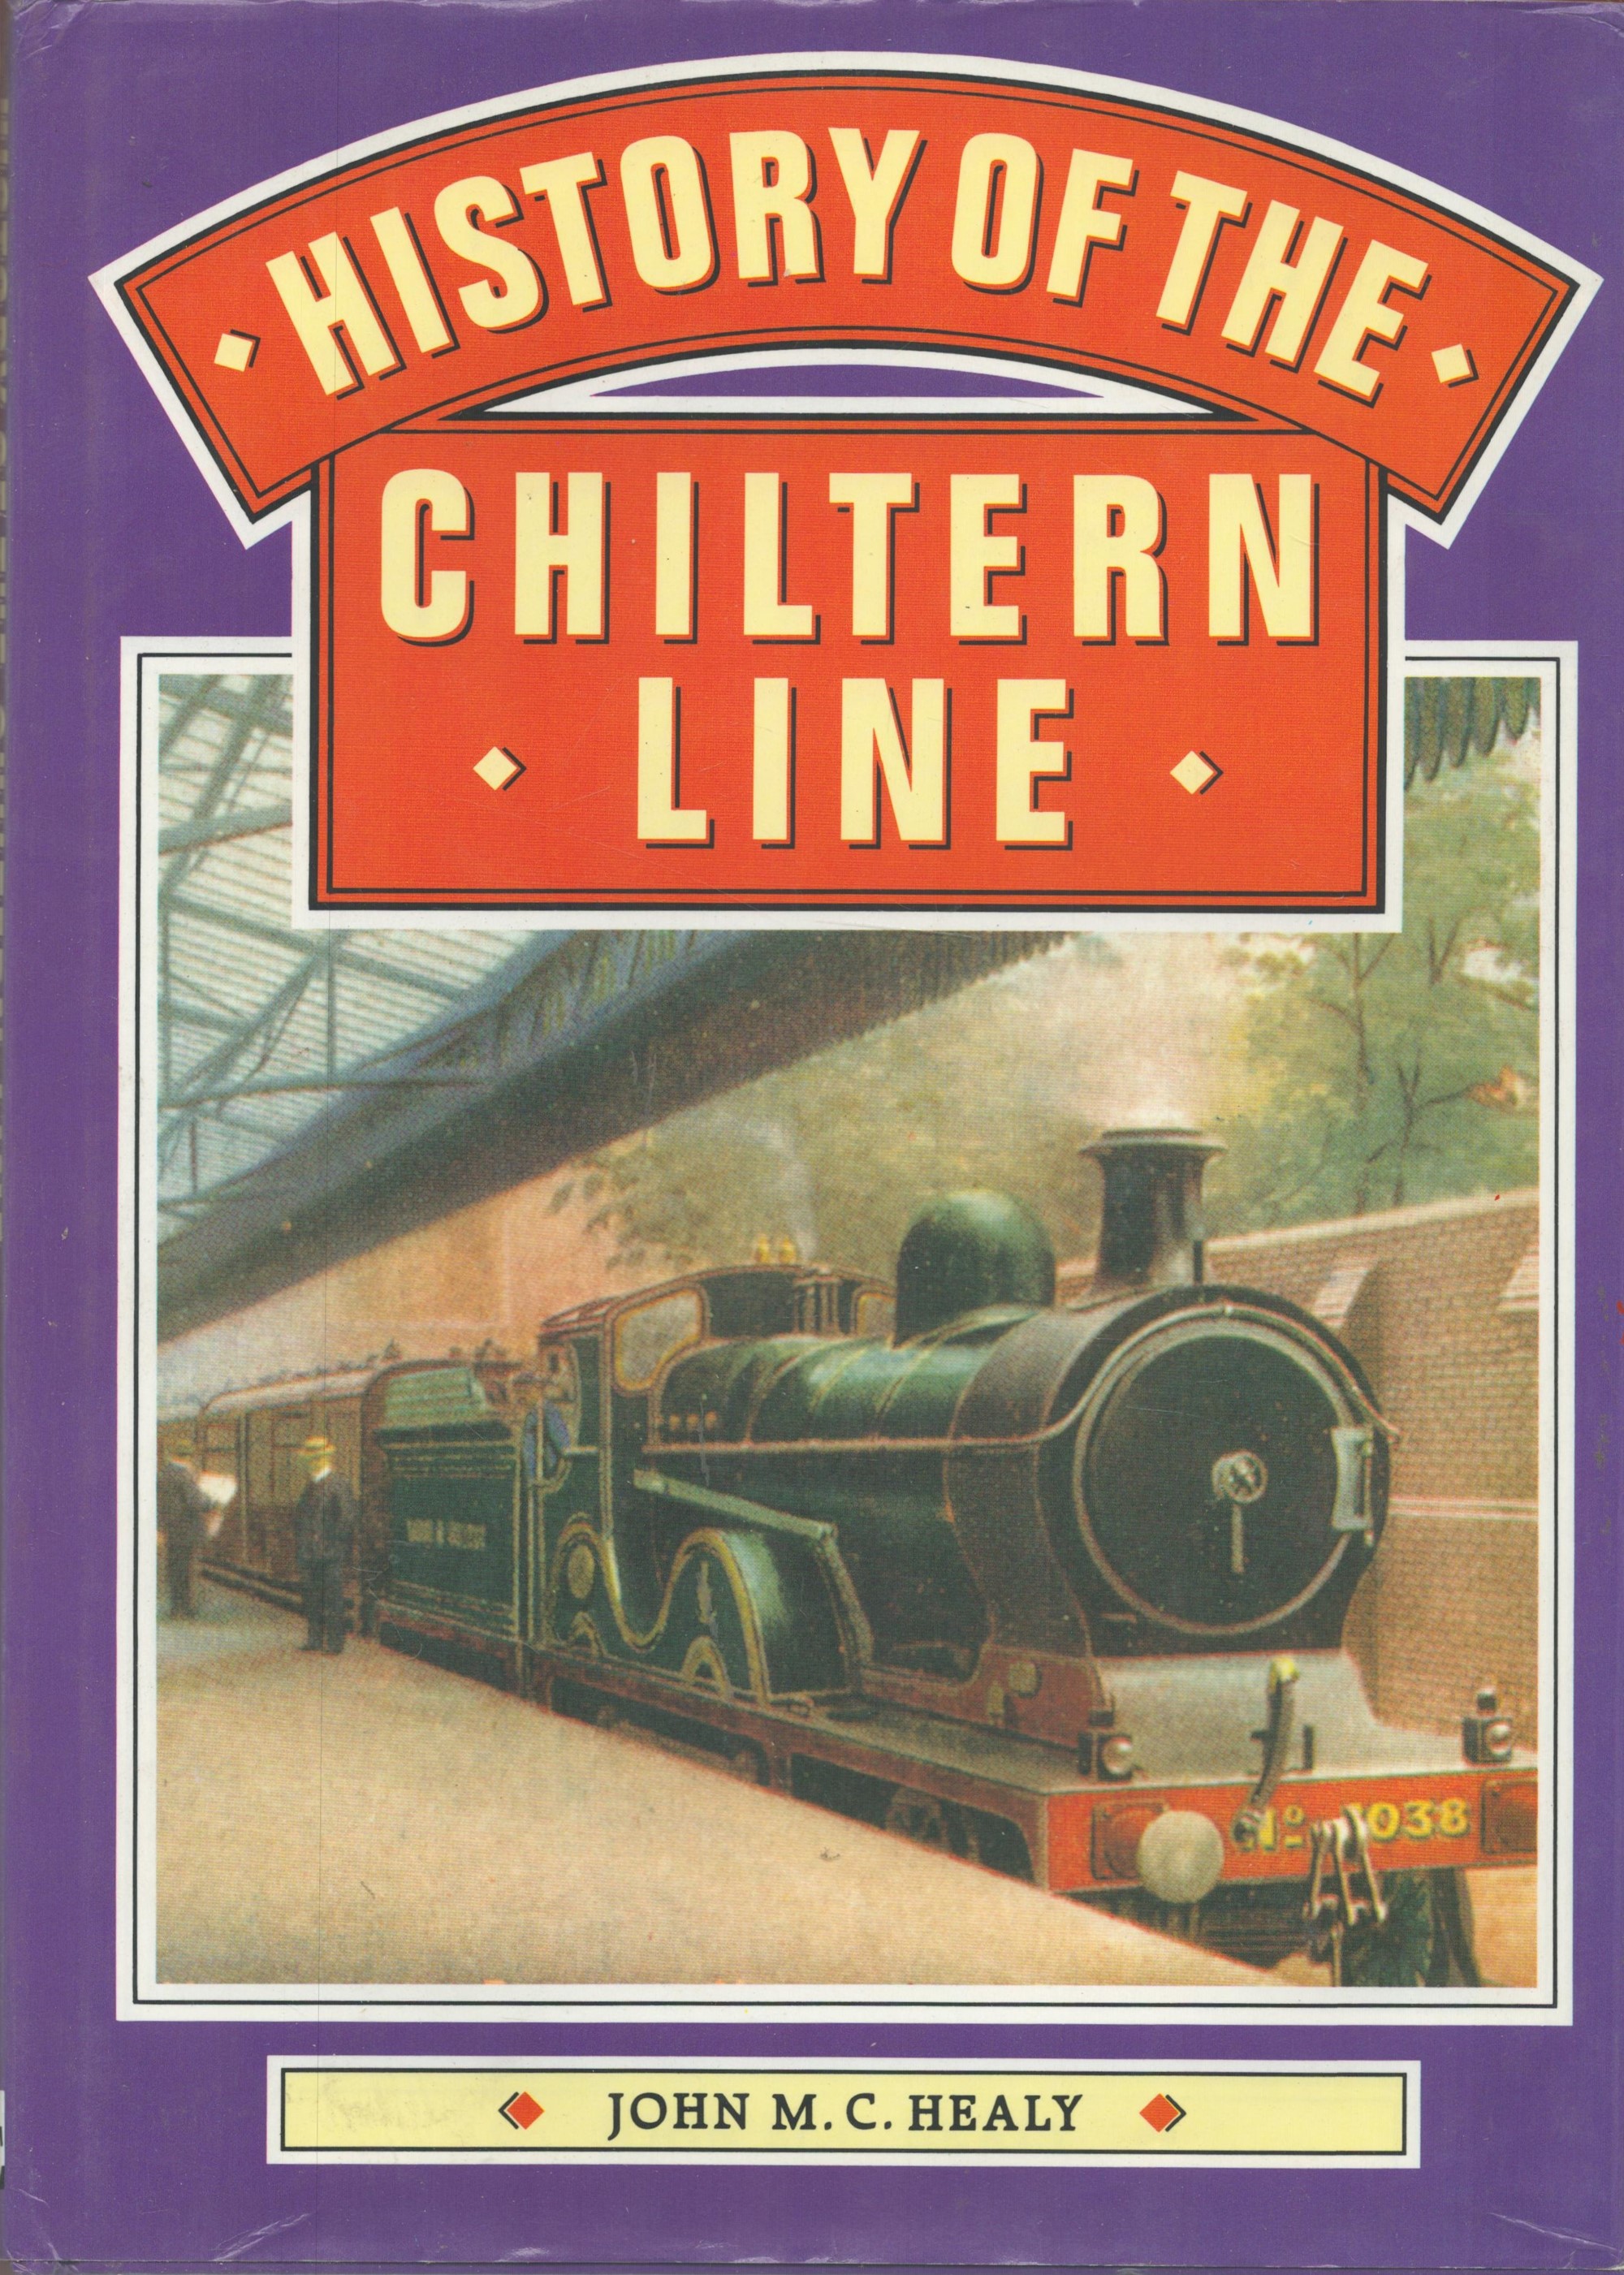 History of The Chiltern Line by John M C Healy 1996 edition unknown Hardback Book published by